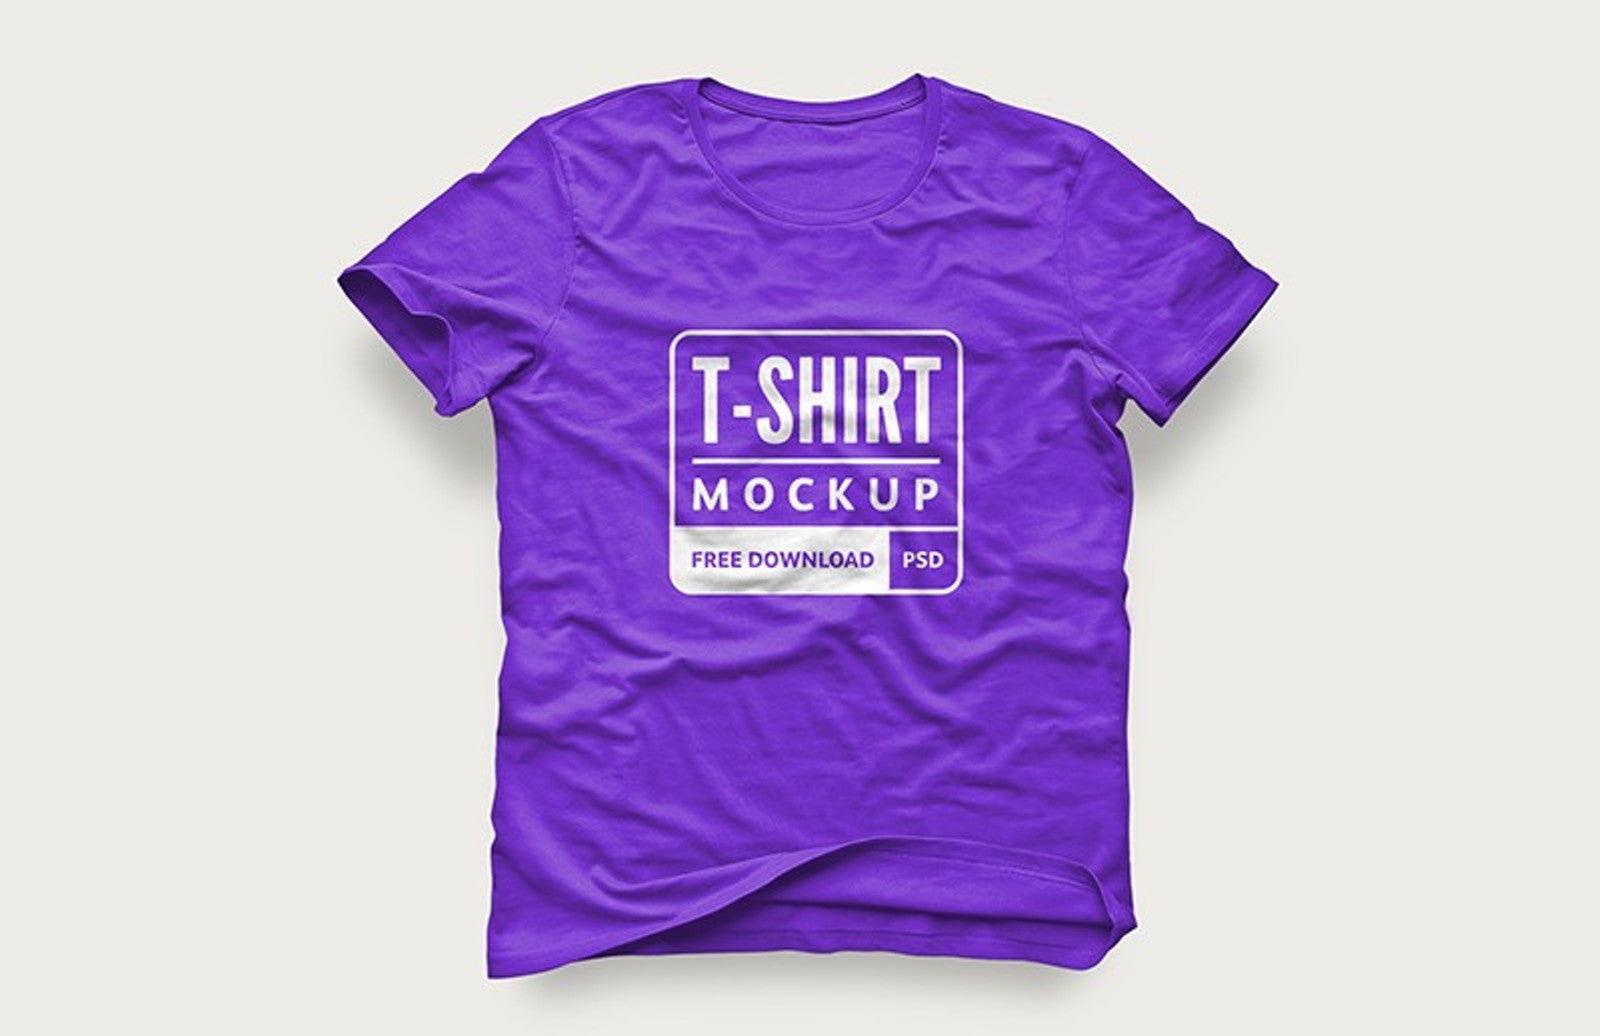 T-Shirt Mockups in Seconds: Free T-Shirt & PSD Templates (2023)